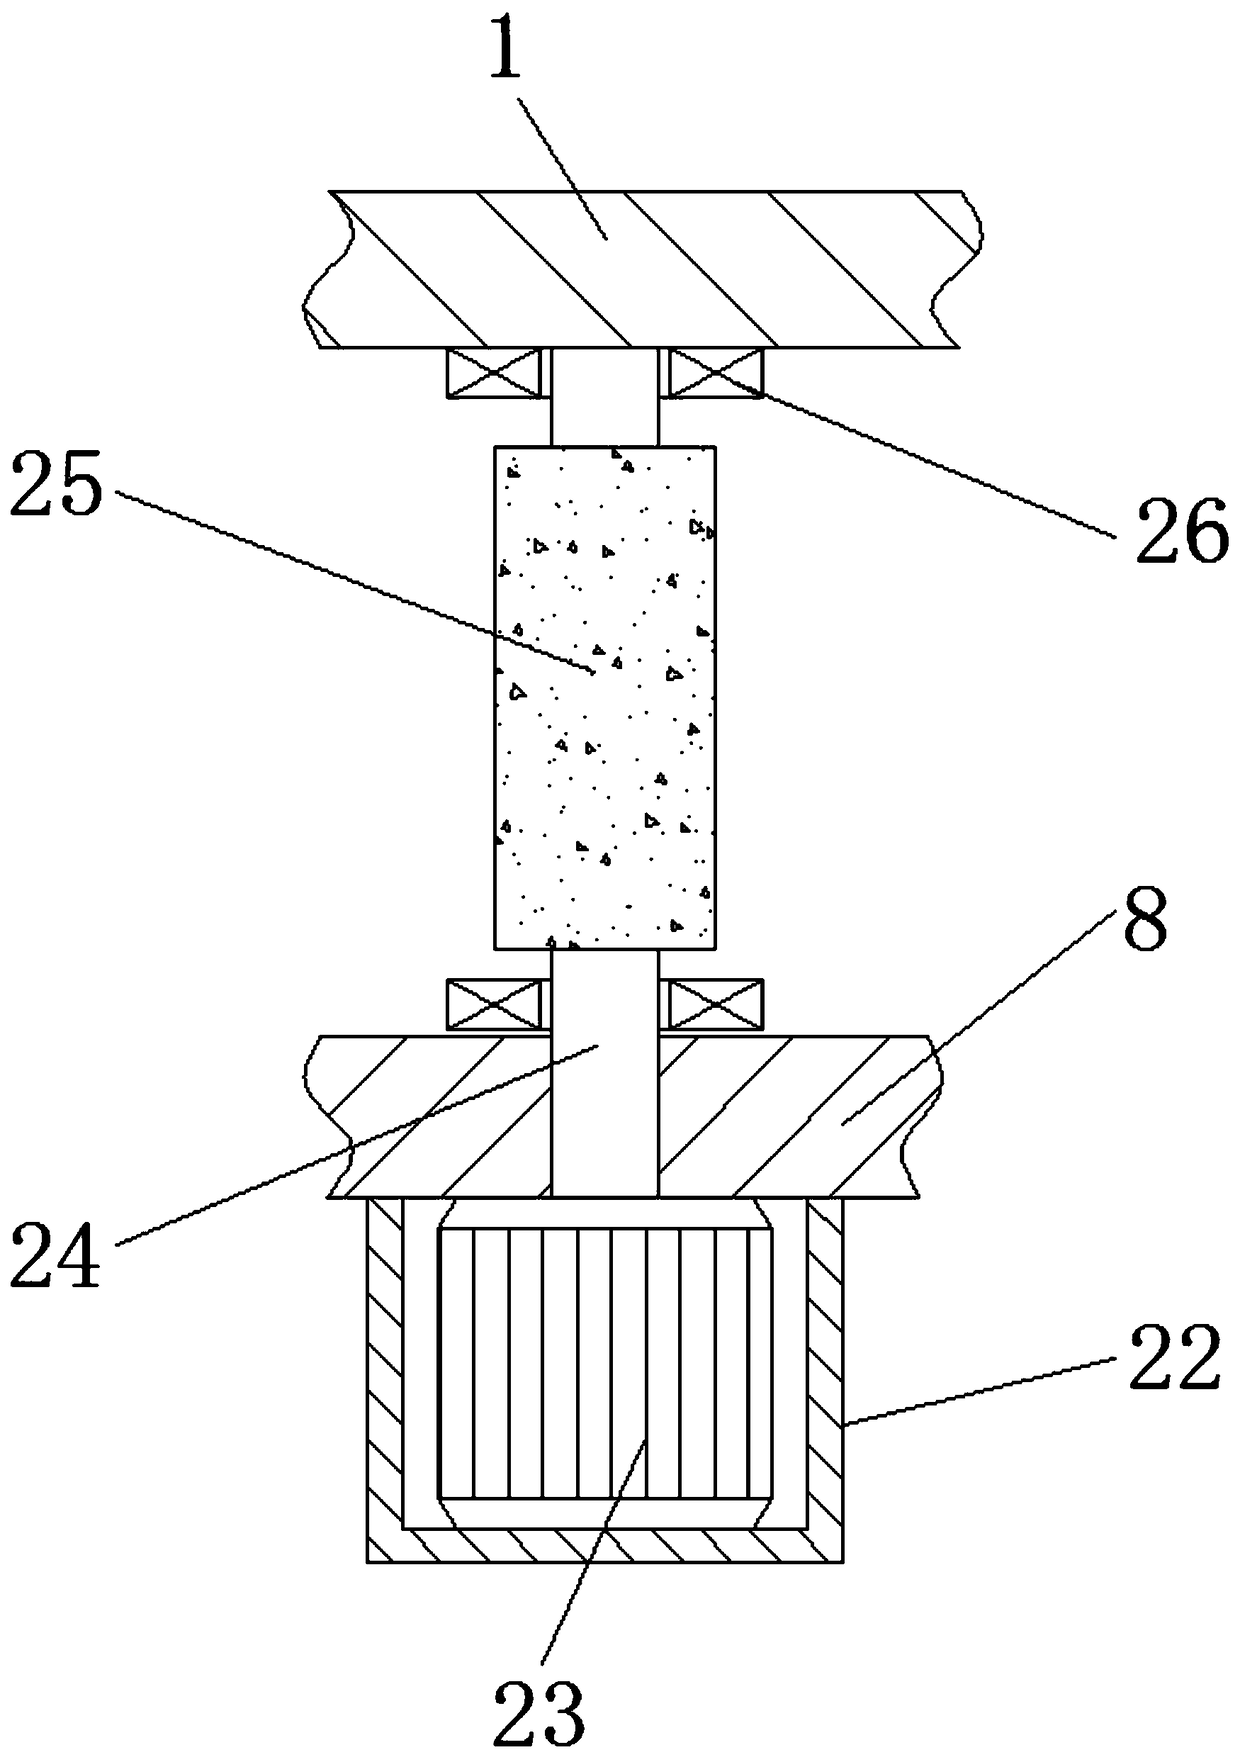 Environmentally-friendly dust removing apparatus for workshop production